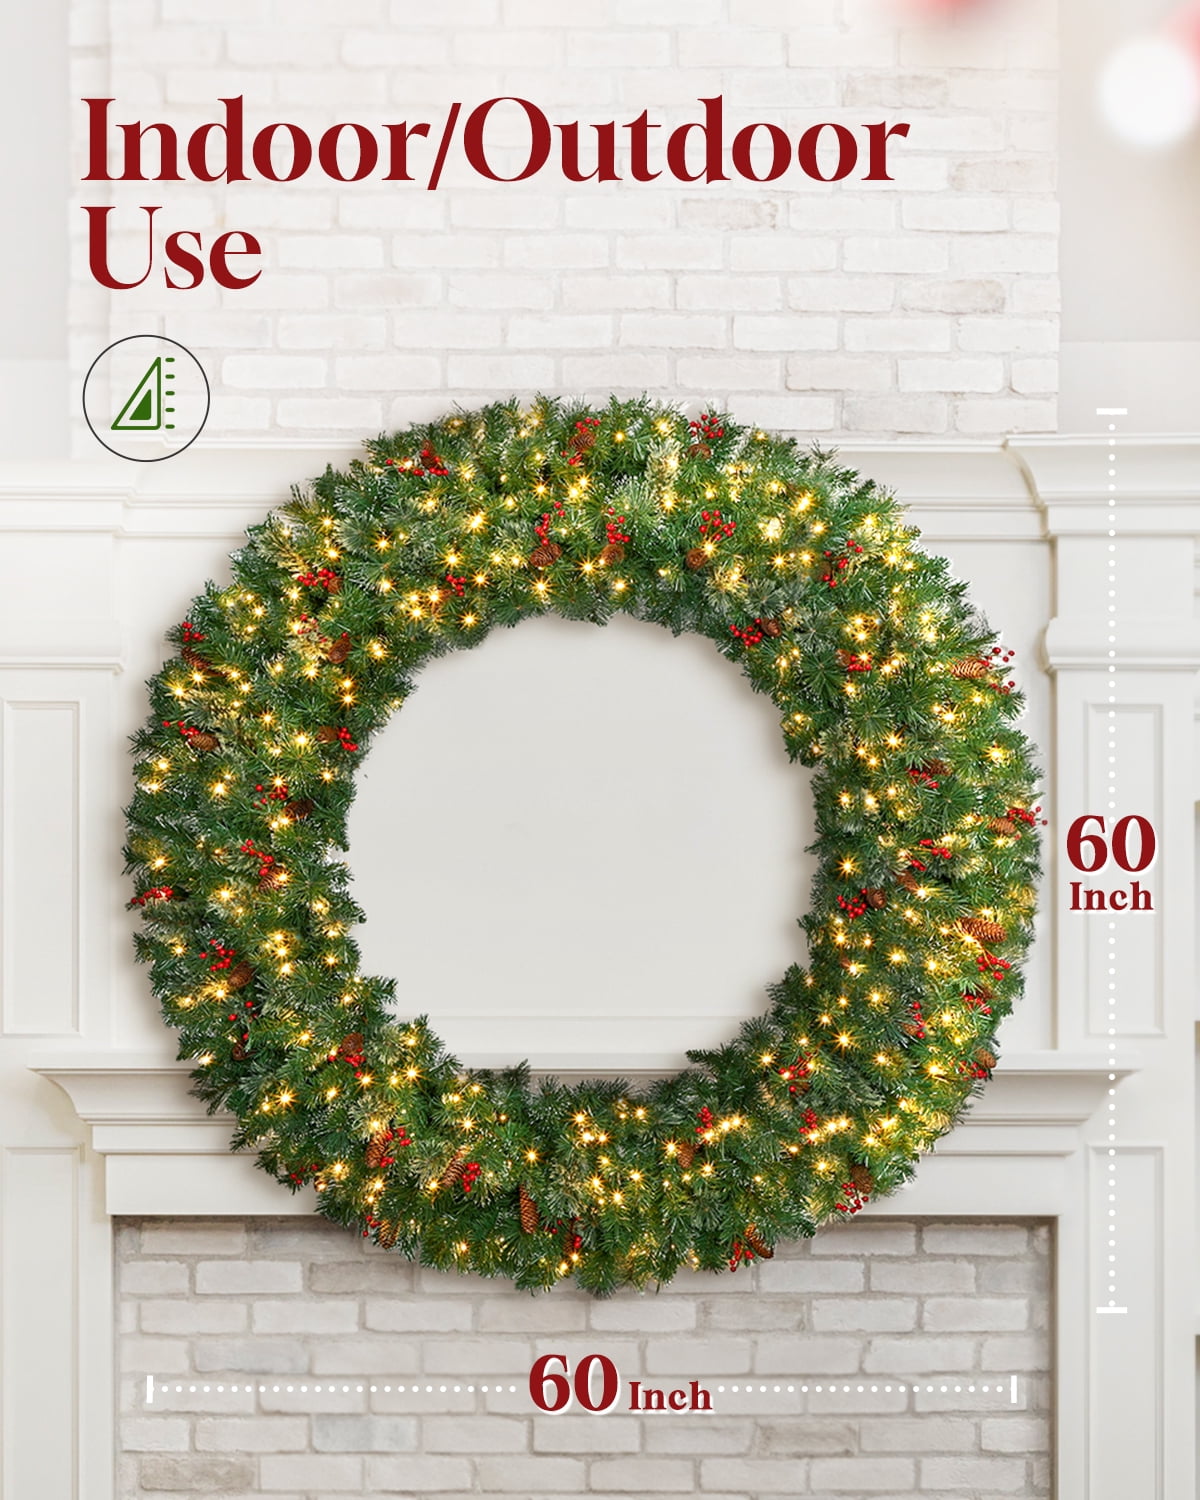 OASIS 21 inch Wreath Base - by the piece